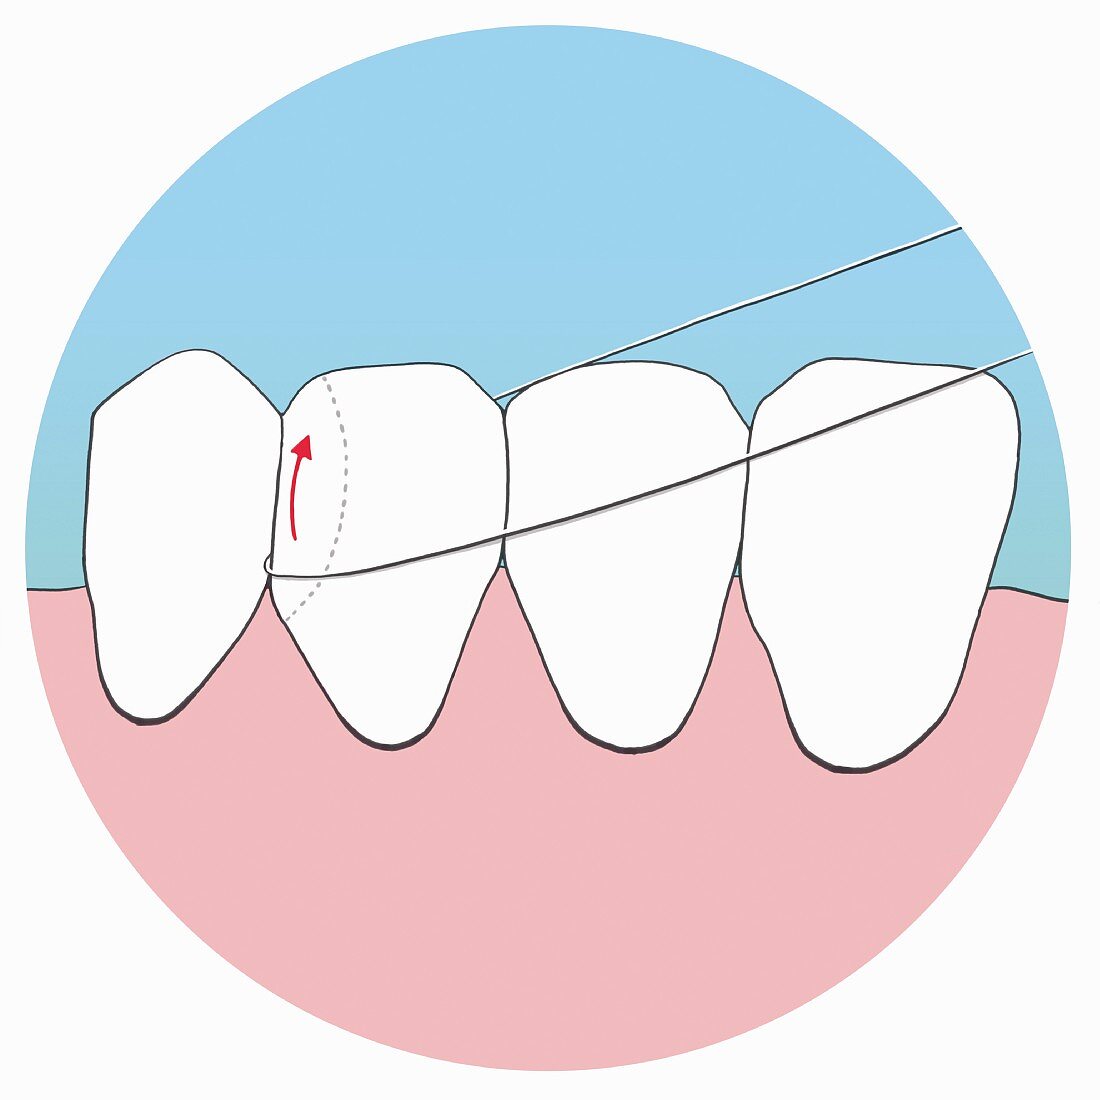 How to use dental floss, step 3, form a semi-circle with the floss at the bottom and pull it up along the left-hand side of the tooth